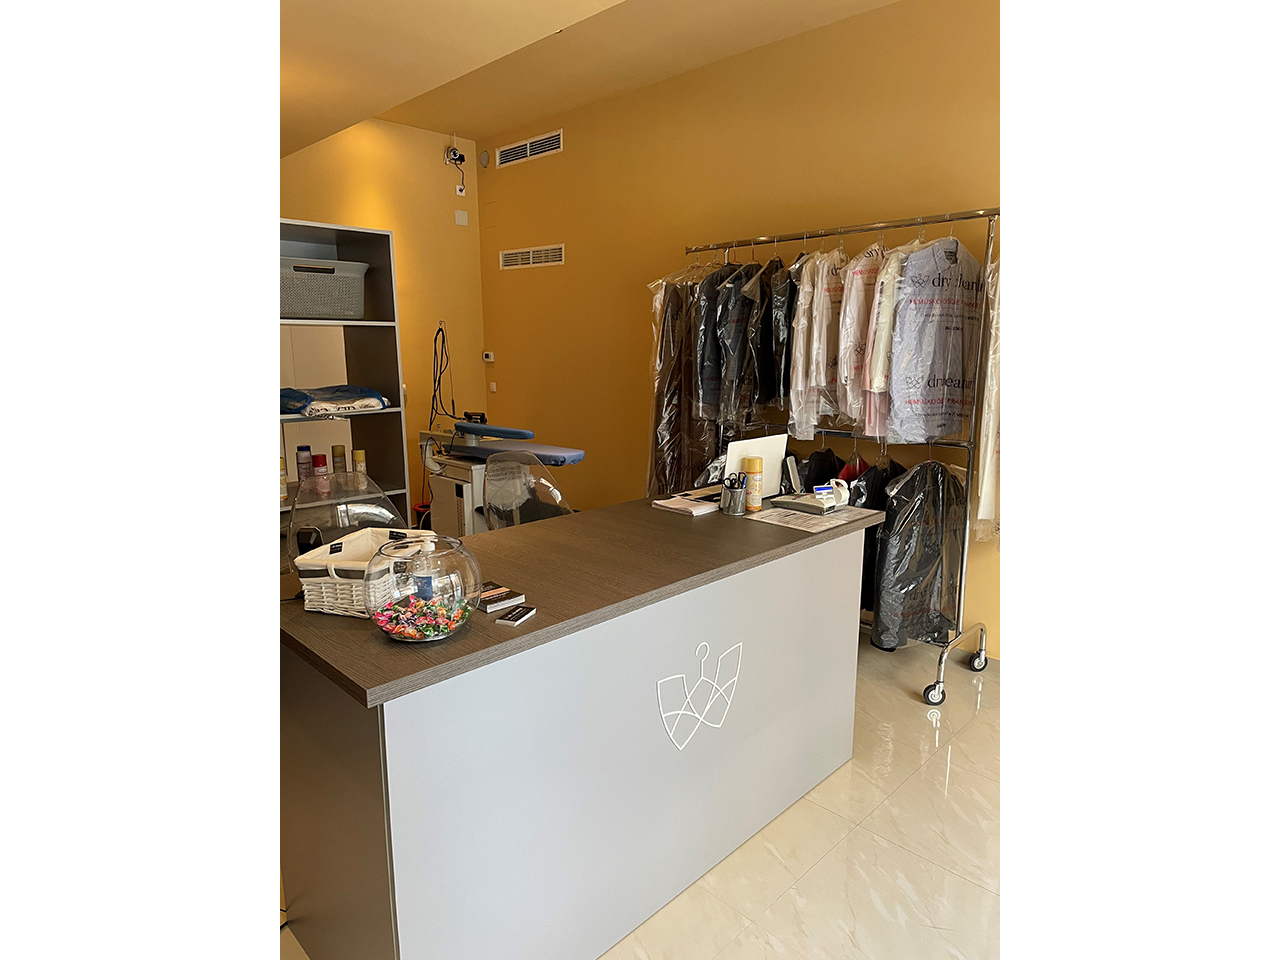 DRY CLEANING WEST Dry-cleaning Beograd